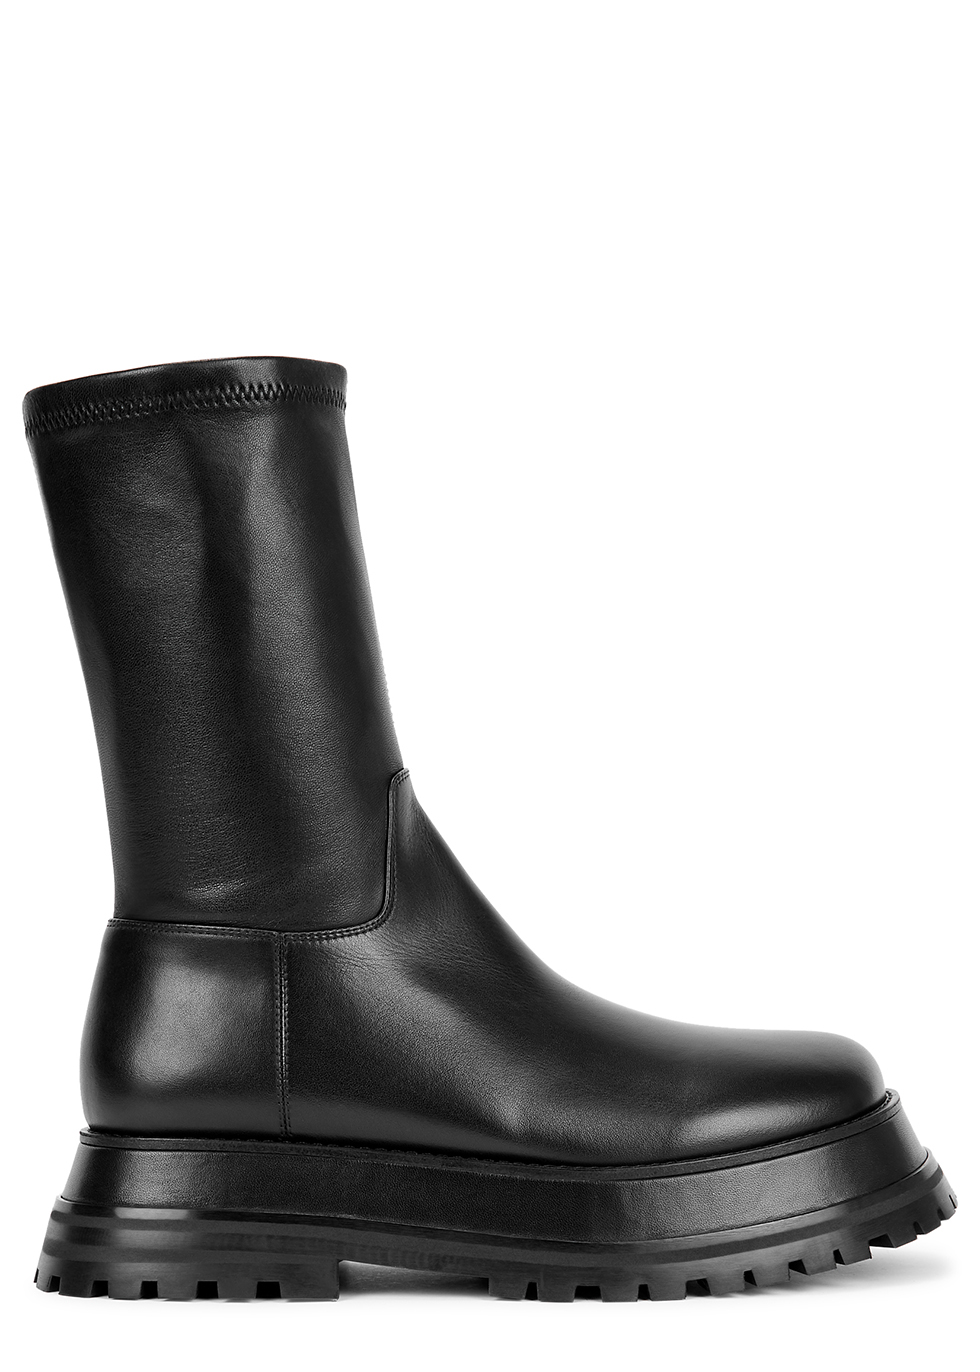 Burberry Hurr black leather ankle boots 